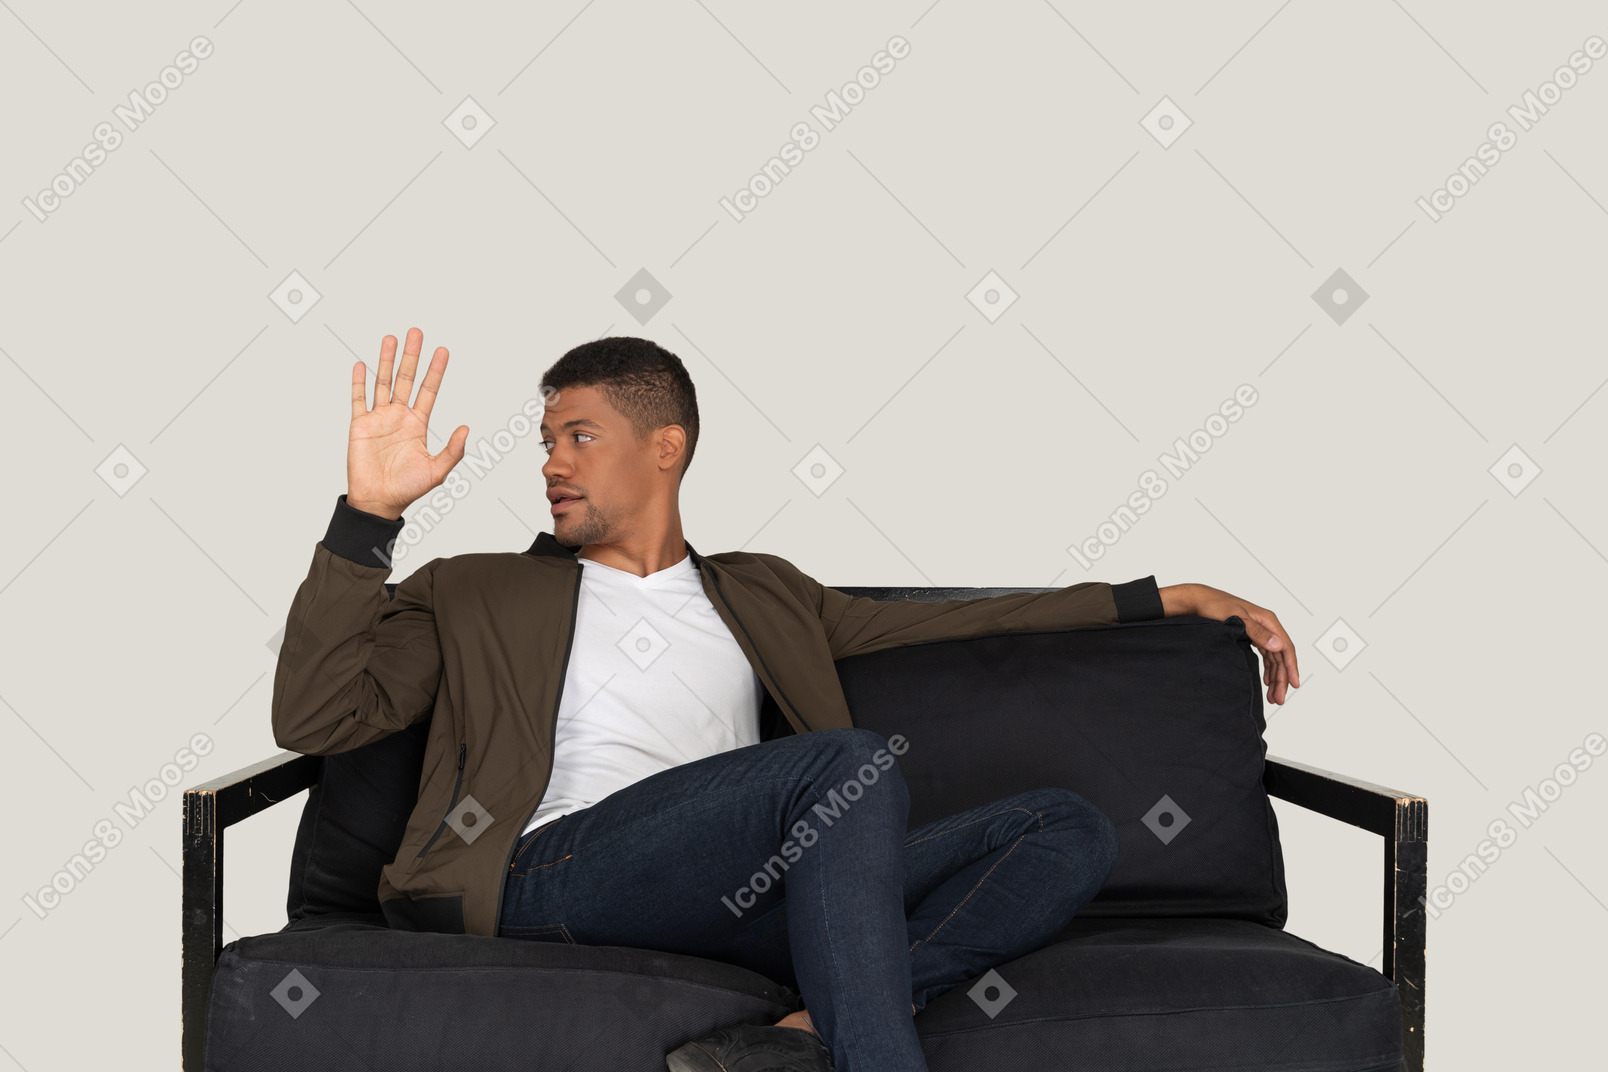 Young man sitting on the sofa and raising a hand